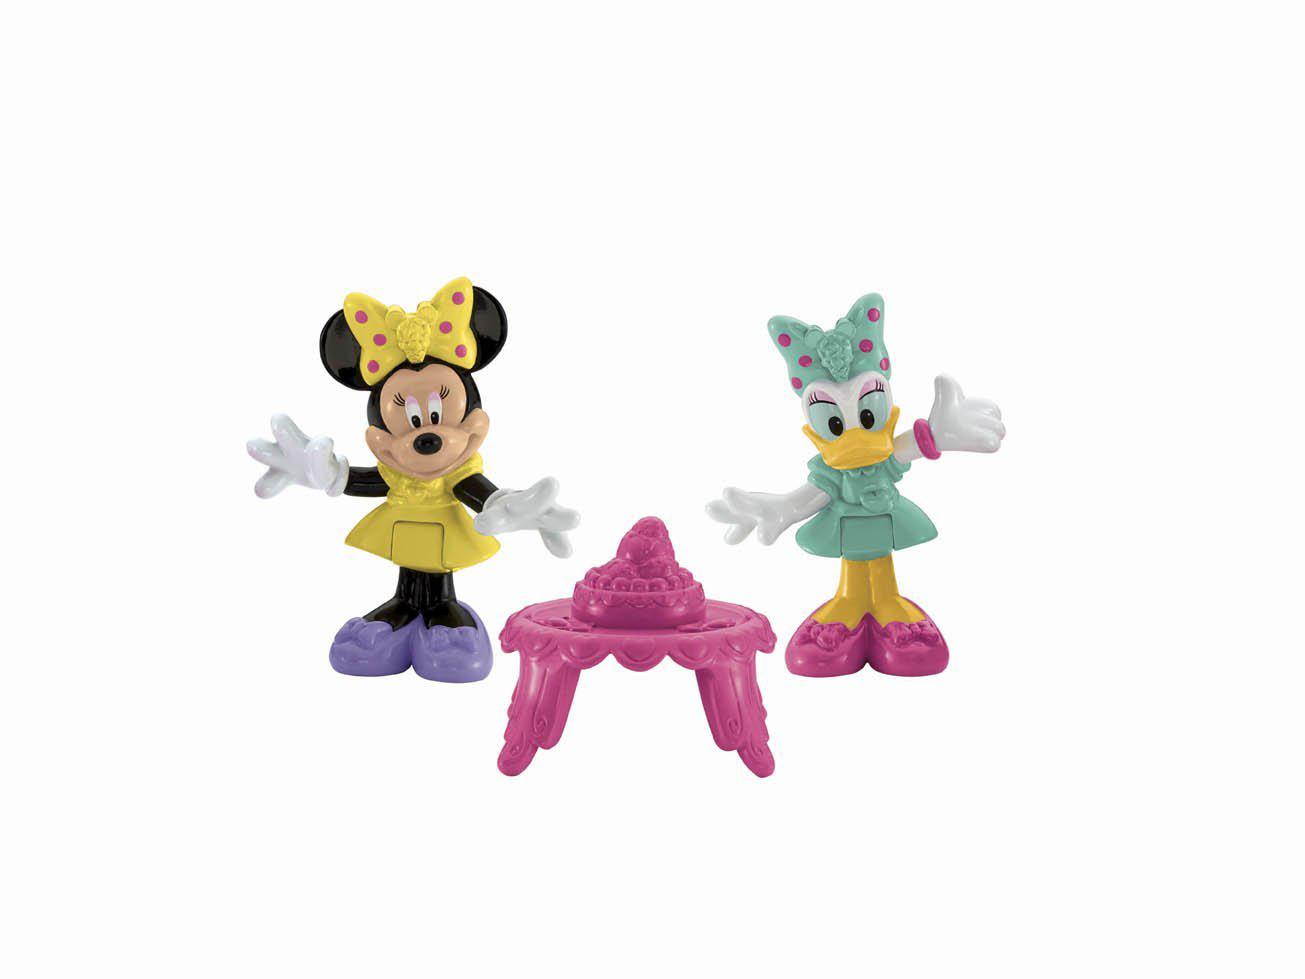 Fisher-Price Disney Minnie & Daisy Figures Pack; image 2 of 2